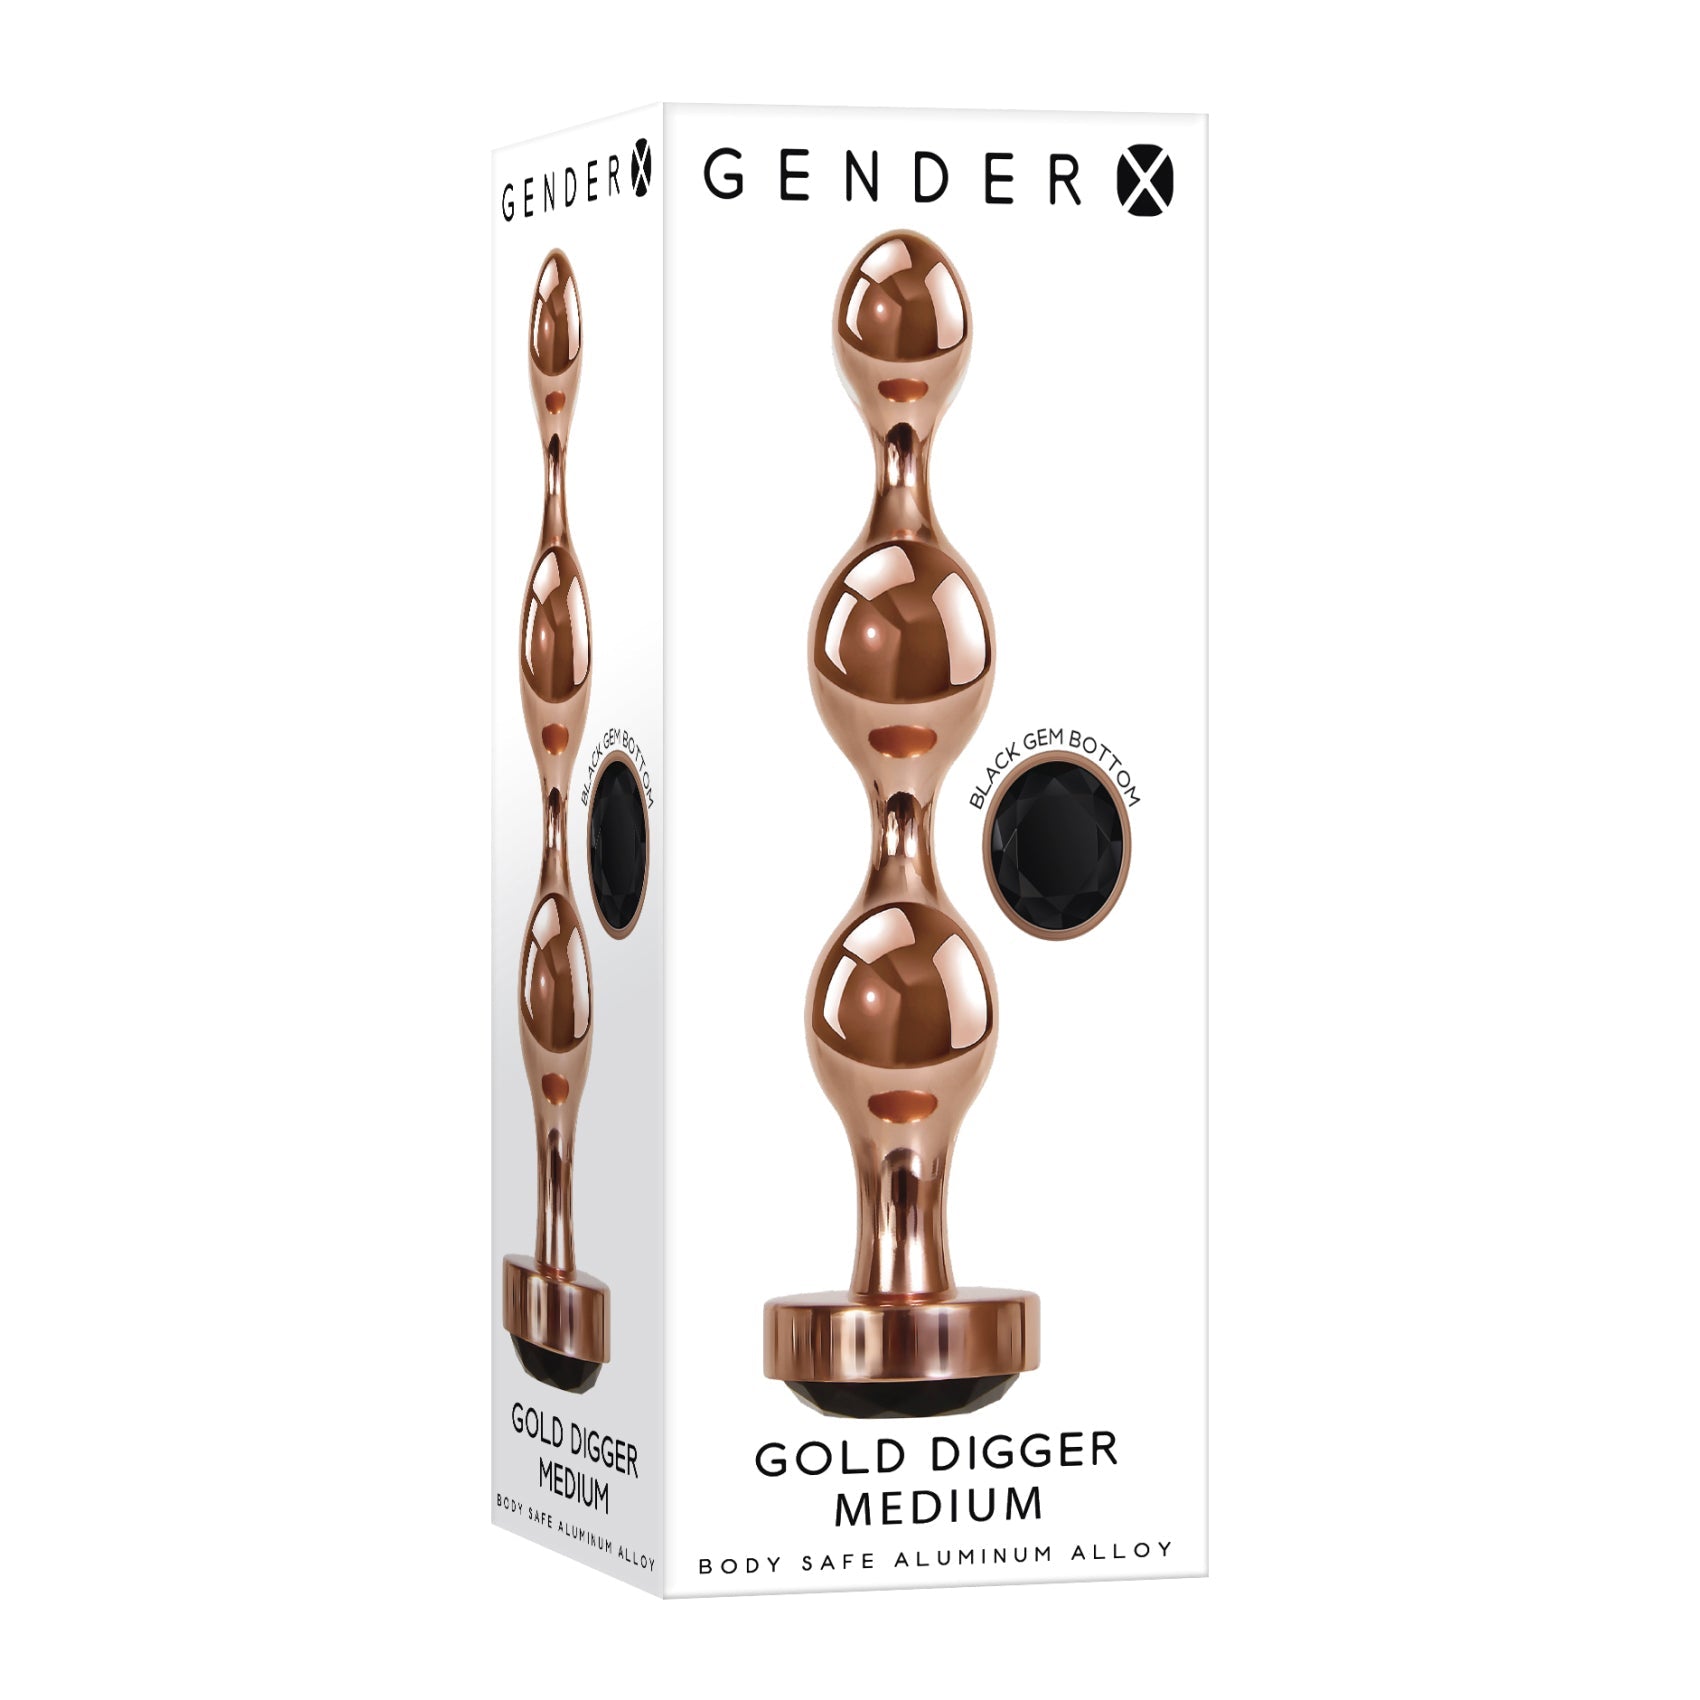 Butt Plug Gold Digger - Medium, Rose Gold/Black - Thorn & Feather Sex Toy Canada